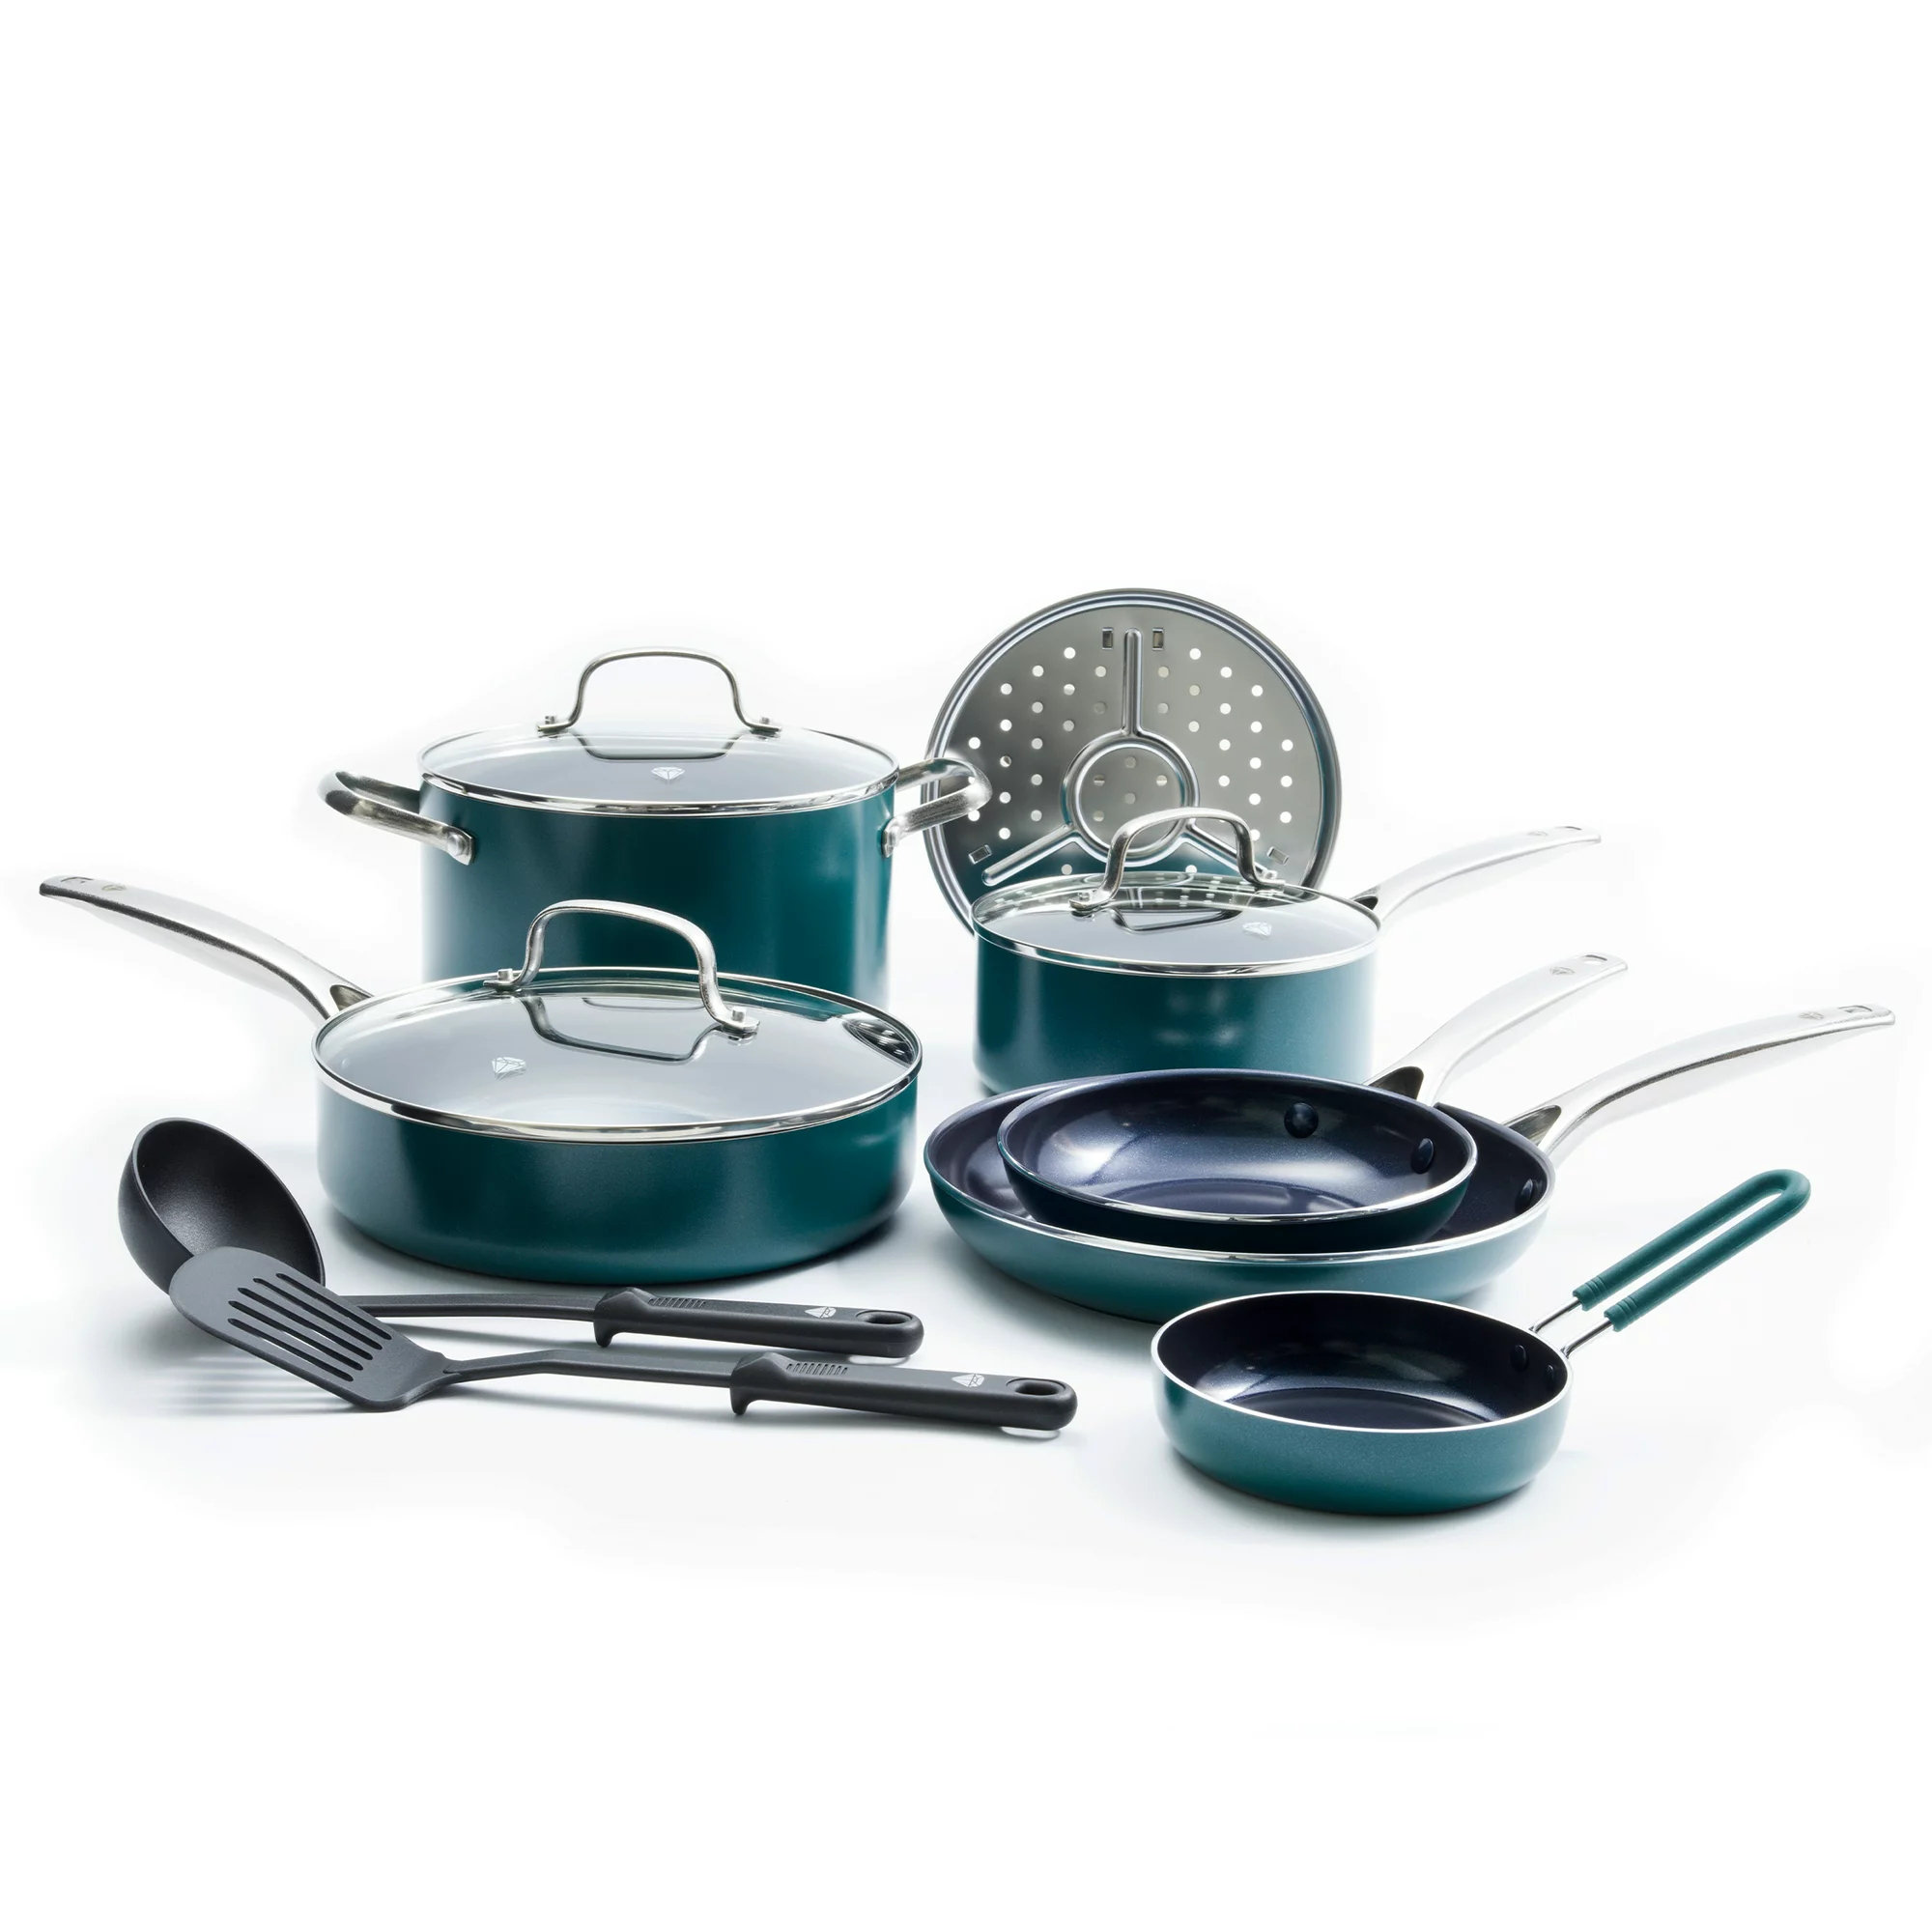 GreenLife Artisan Healthy Ceramic Nonstick, 12-Piece Cookware Set, Stainless Steel Handle Color: Turquoise CC005649-001